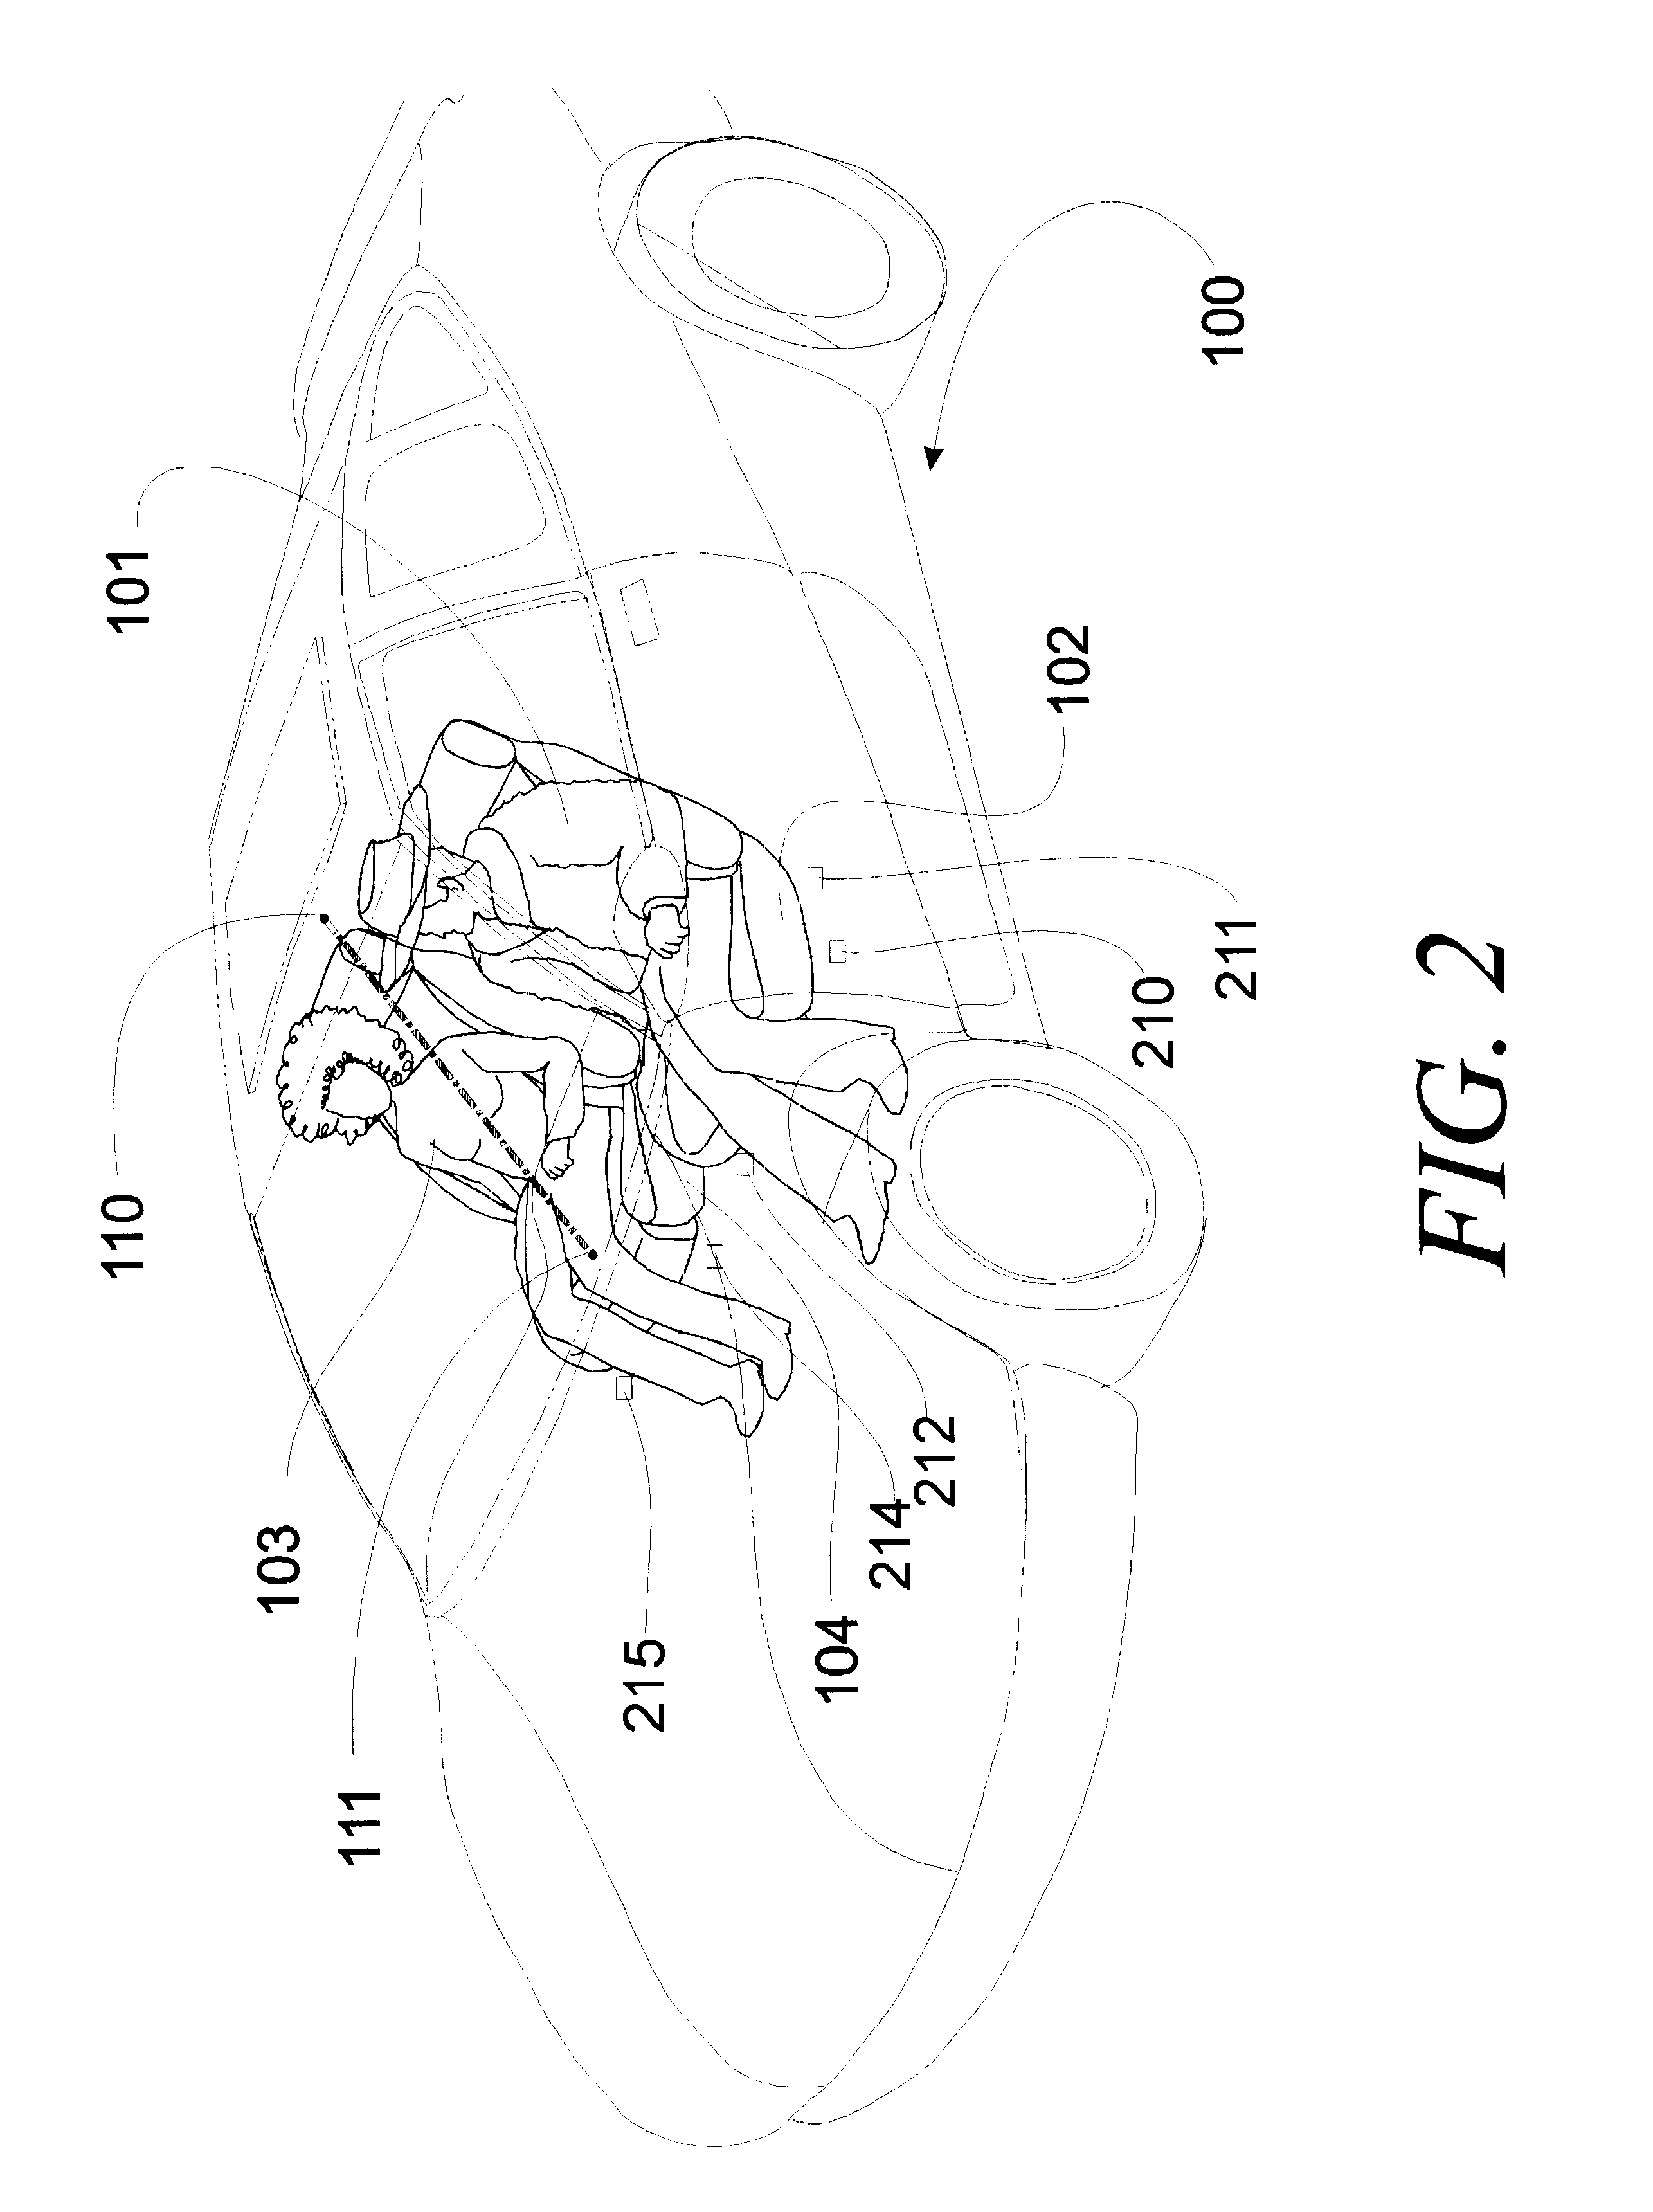 System for determining the occupancy state of a seat in a vehicle and controlling a component based thereon